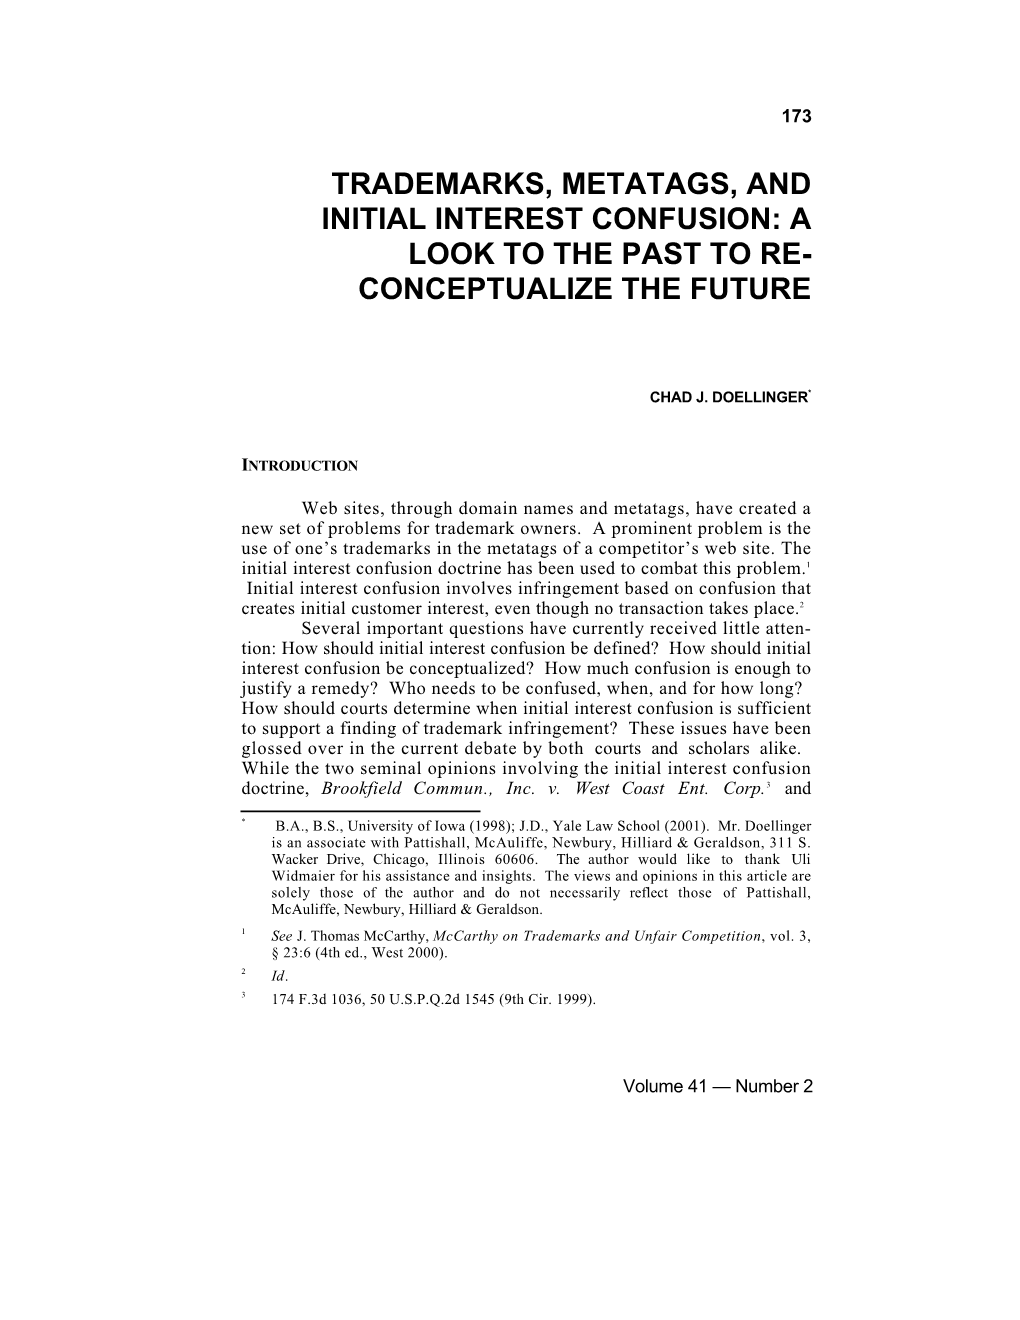 Trademarks, Metatags, and Initial Interest Confusion: a Look to the Past to Re- Conceptualize the Future